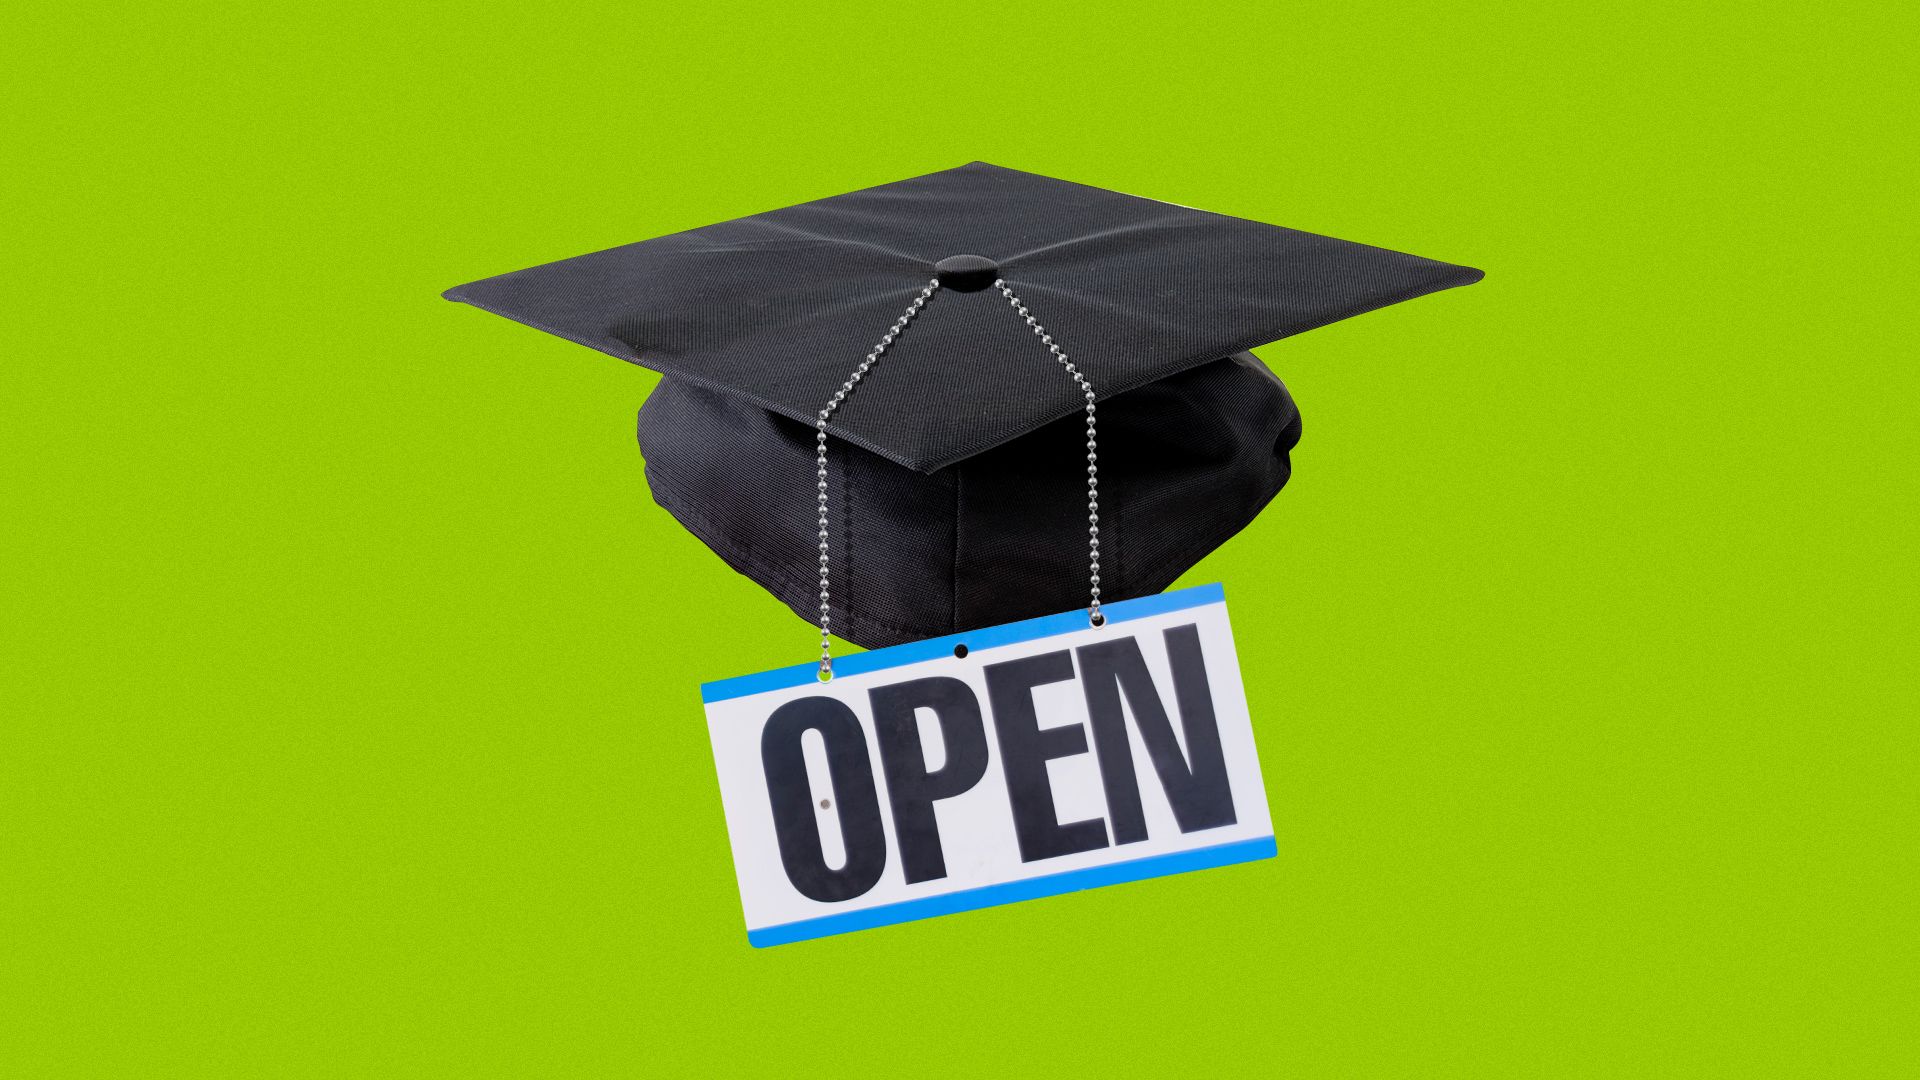 Illustration of a graduation cap with an open sign replacing the tassel